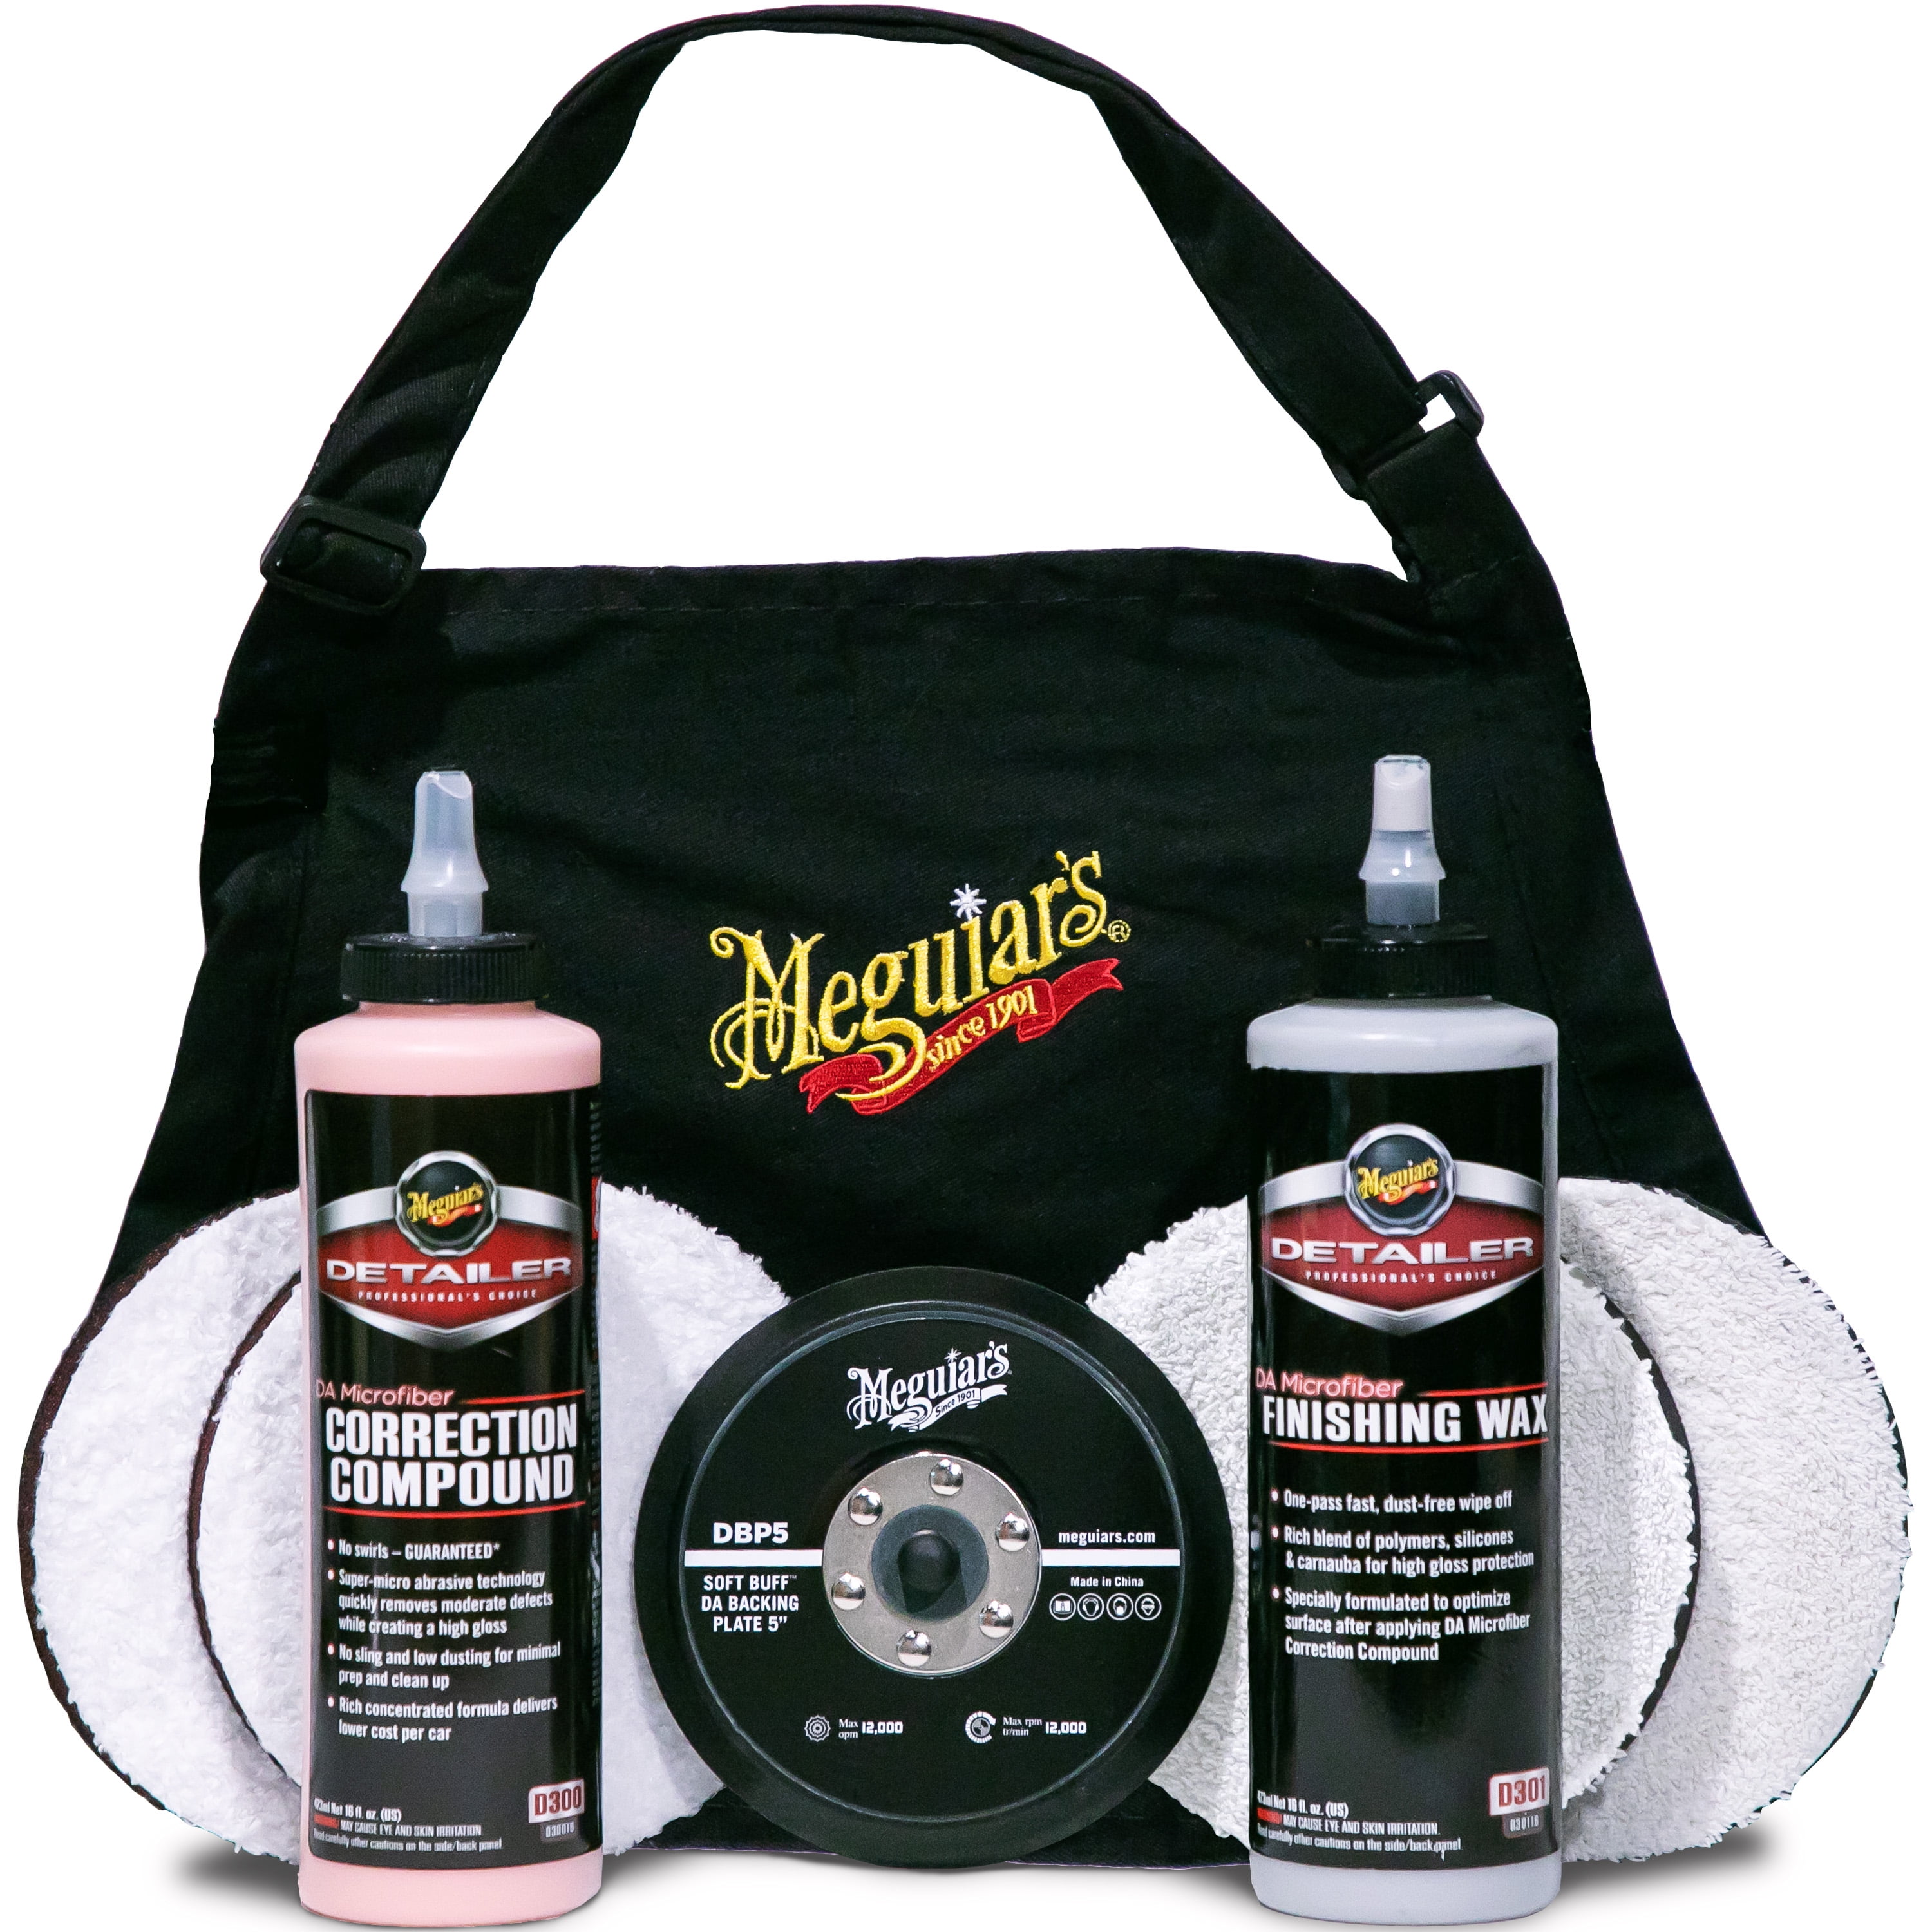 How To Use Meguiar's Clay Kit To Remove Overspray On My Mercedes Benz CL55  AMG & SL500 